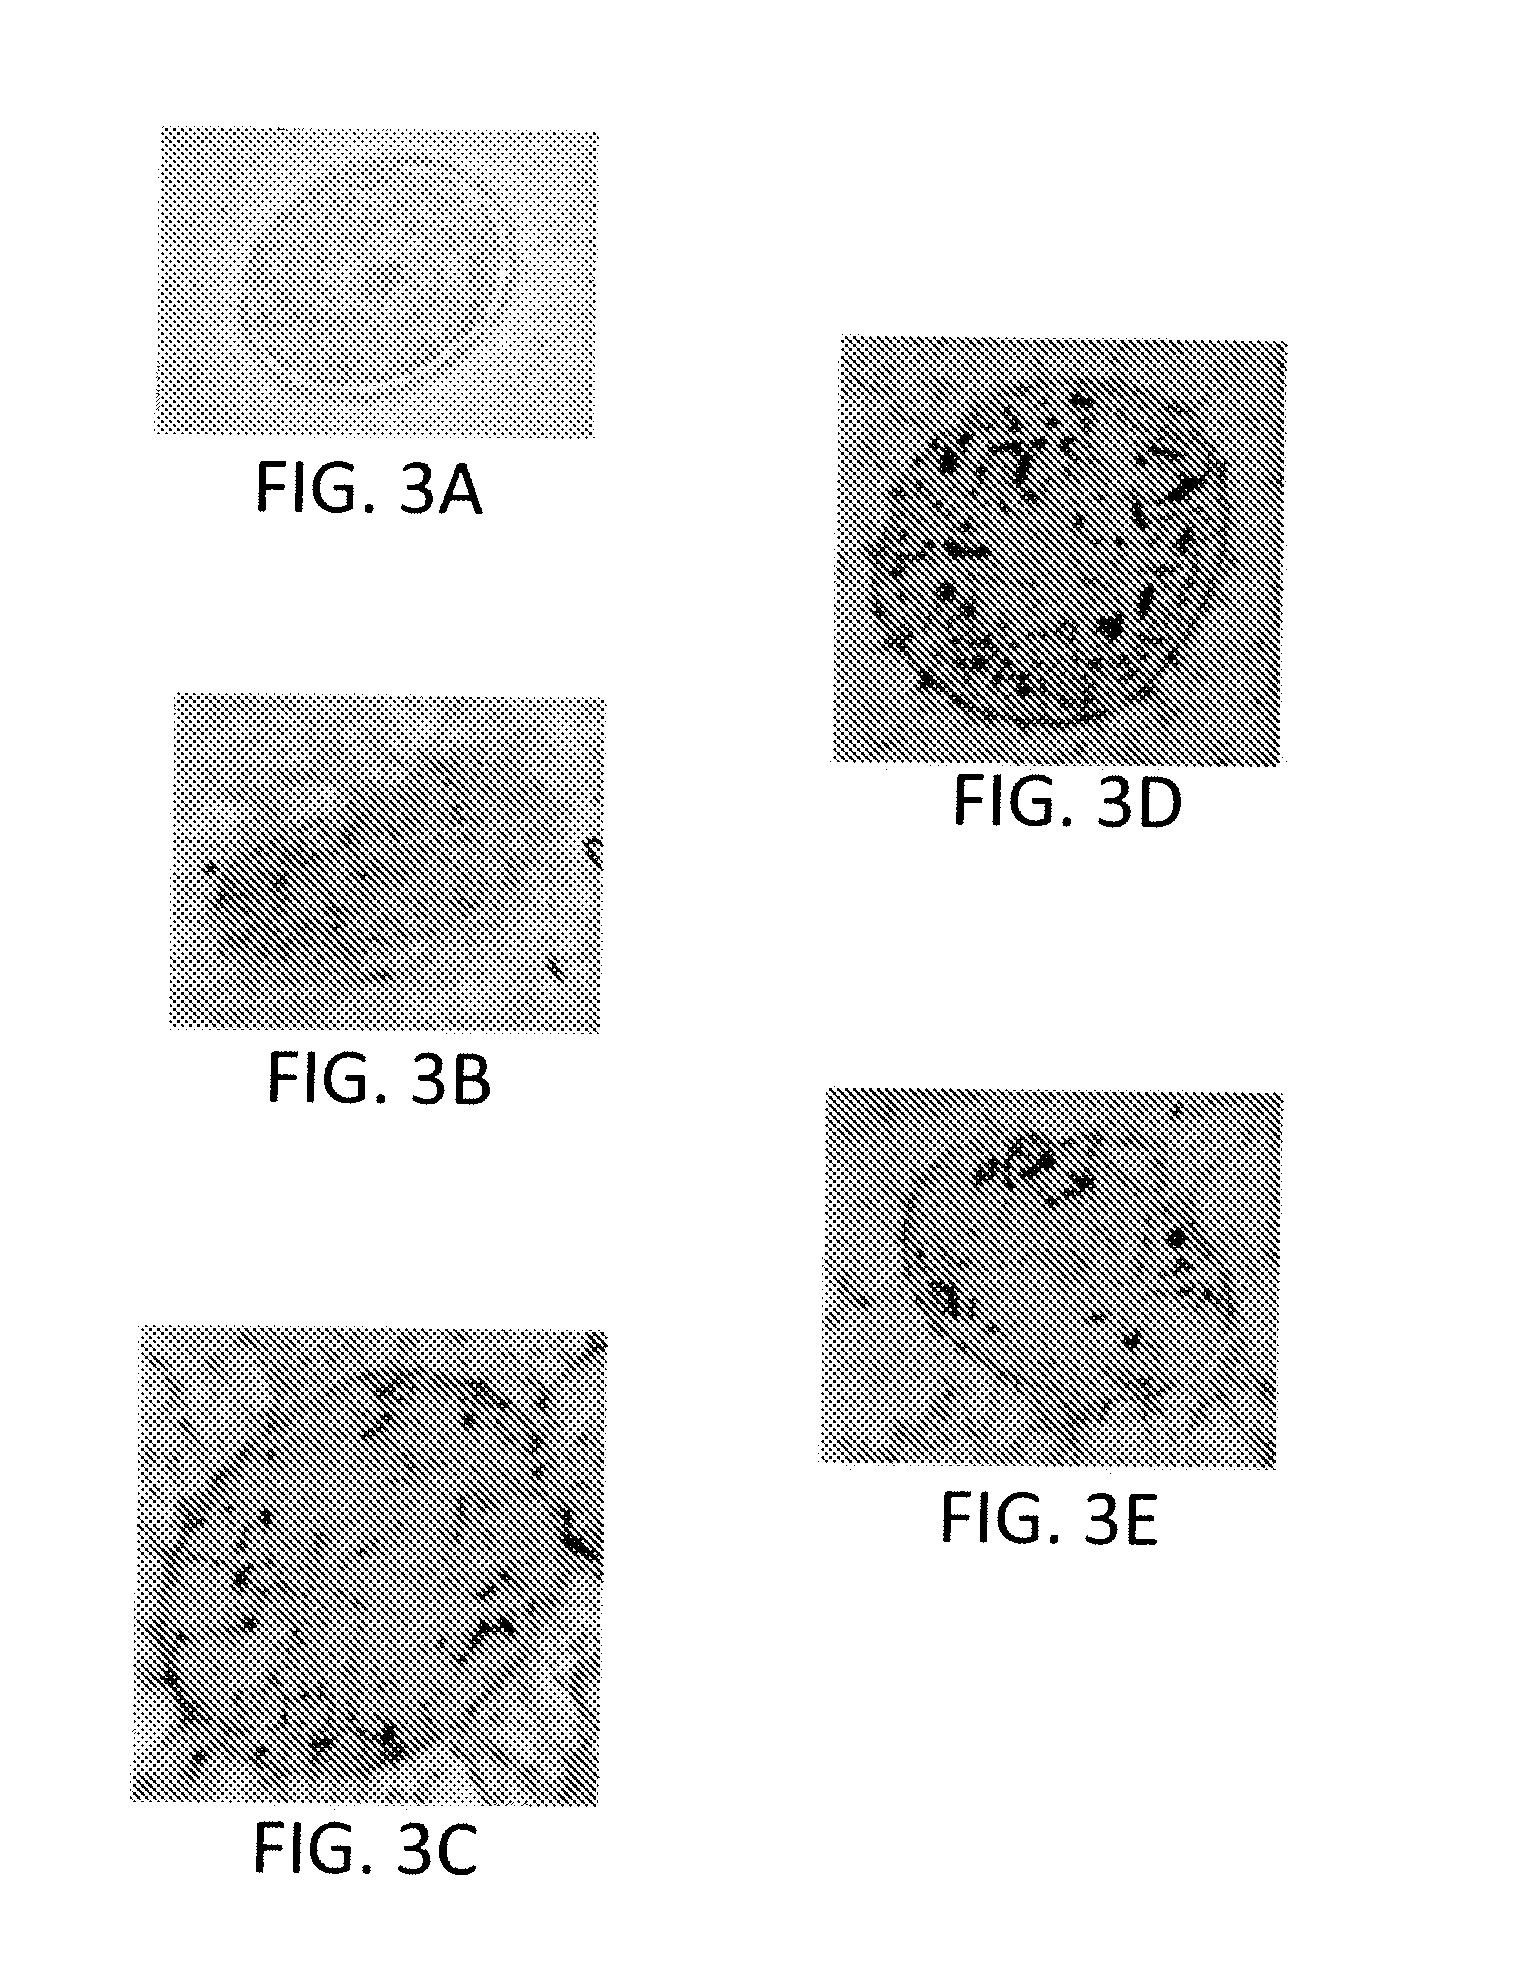 Method for Chemically Modifying the Internal Region of a Hair Shaft